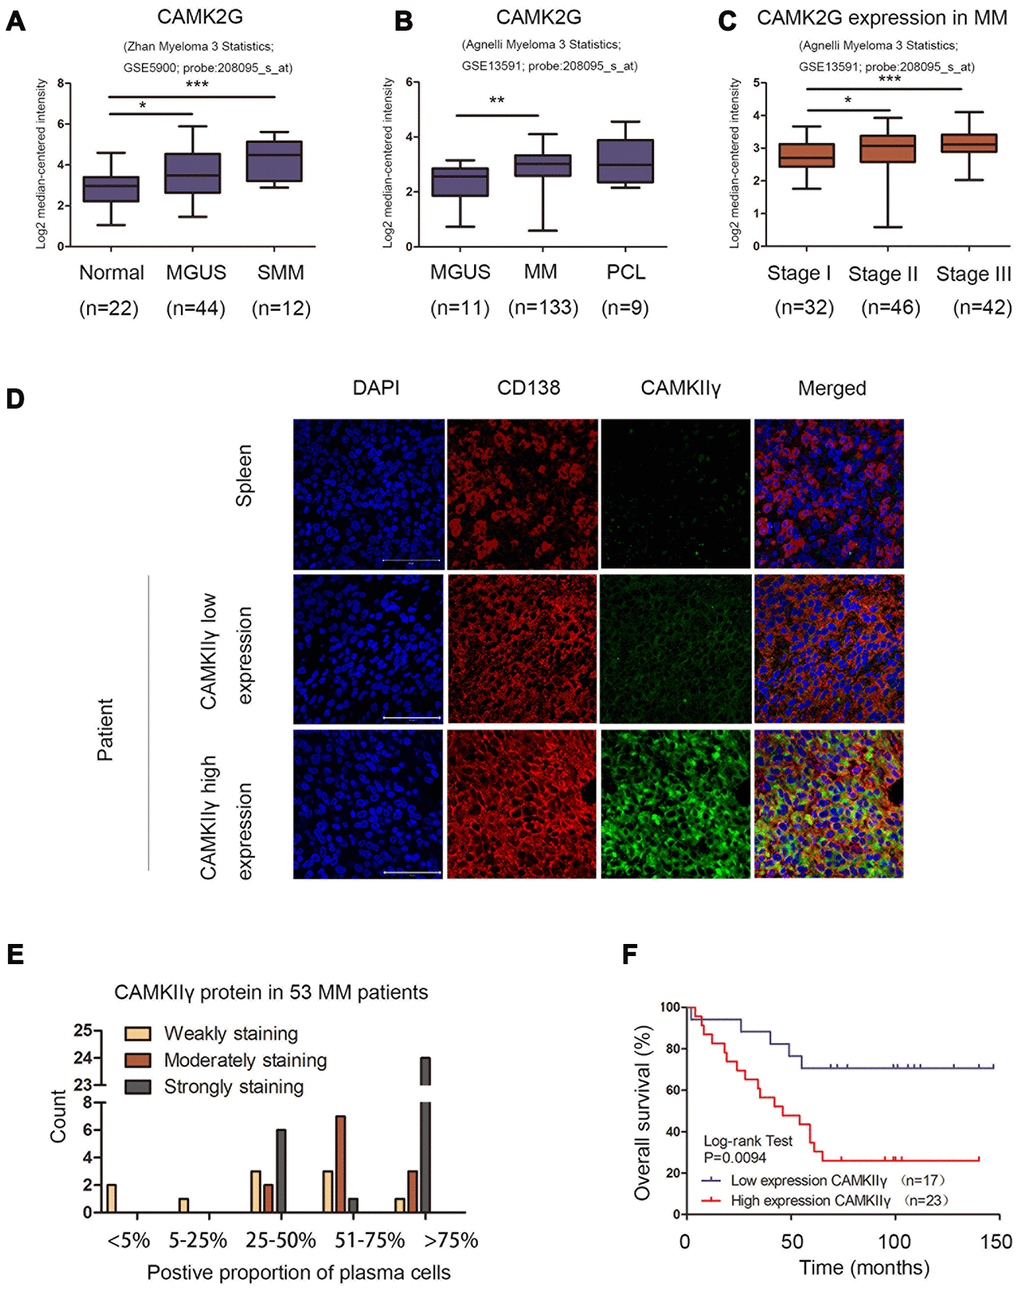 Overexpression of CAMKIIγ was associated with disease progression and poor prognosis of MM patients. (A, B) CAMK2G was differentially expressed in samples from healthy donors, monoclonal gammopathy of undetermined significance (MGUS), smoldering MM (SMM), MM, or PCL patients in the indicated datasets (*P P P C) The distribution of CAMK2G mRNA was at different stage of MM (*P P P D) CAMKIIγ protein expression was measured by immunofluorescent trichrome staining of DAPI (blue nuclear staining), plasma cell marker CD138 (red membrane staining) and CAMKIIγ (green cytoplasm staining). Representative images were shown at 630 X magnification. The white scale bar represented 50 μm. (E) The distribution of CAMKIIγ protein in 53 MM patients analyzed. (F) Kaplan-Meier overall survival curve for CAMKIIγ expression in 40 MM patients with extramedullary disease. Patients with high CAMKIIγ expression were significantly associated with poorer overall survival (P = 0.0094).